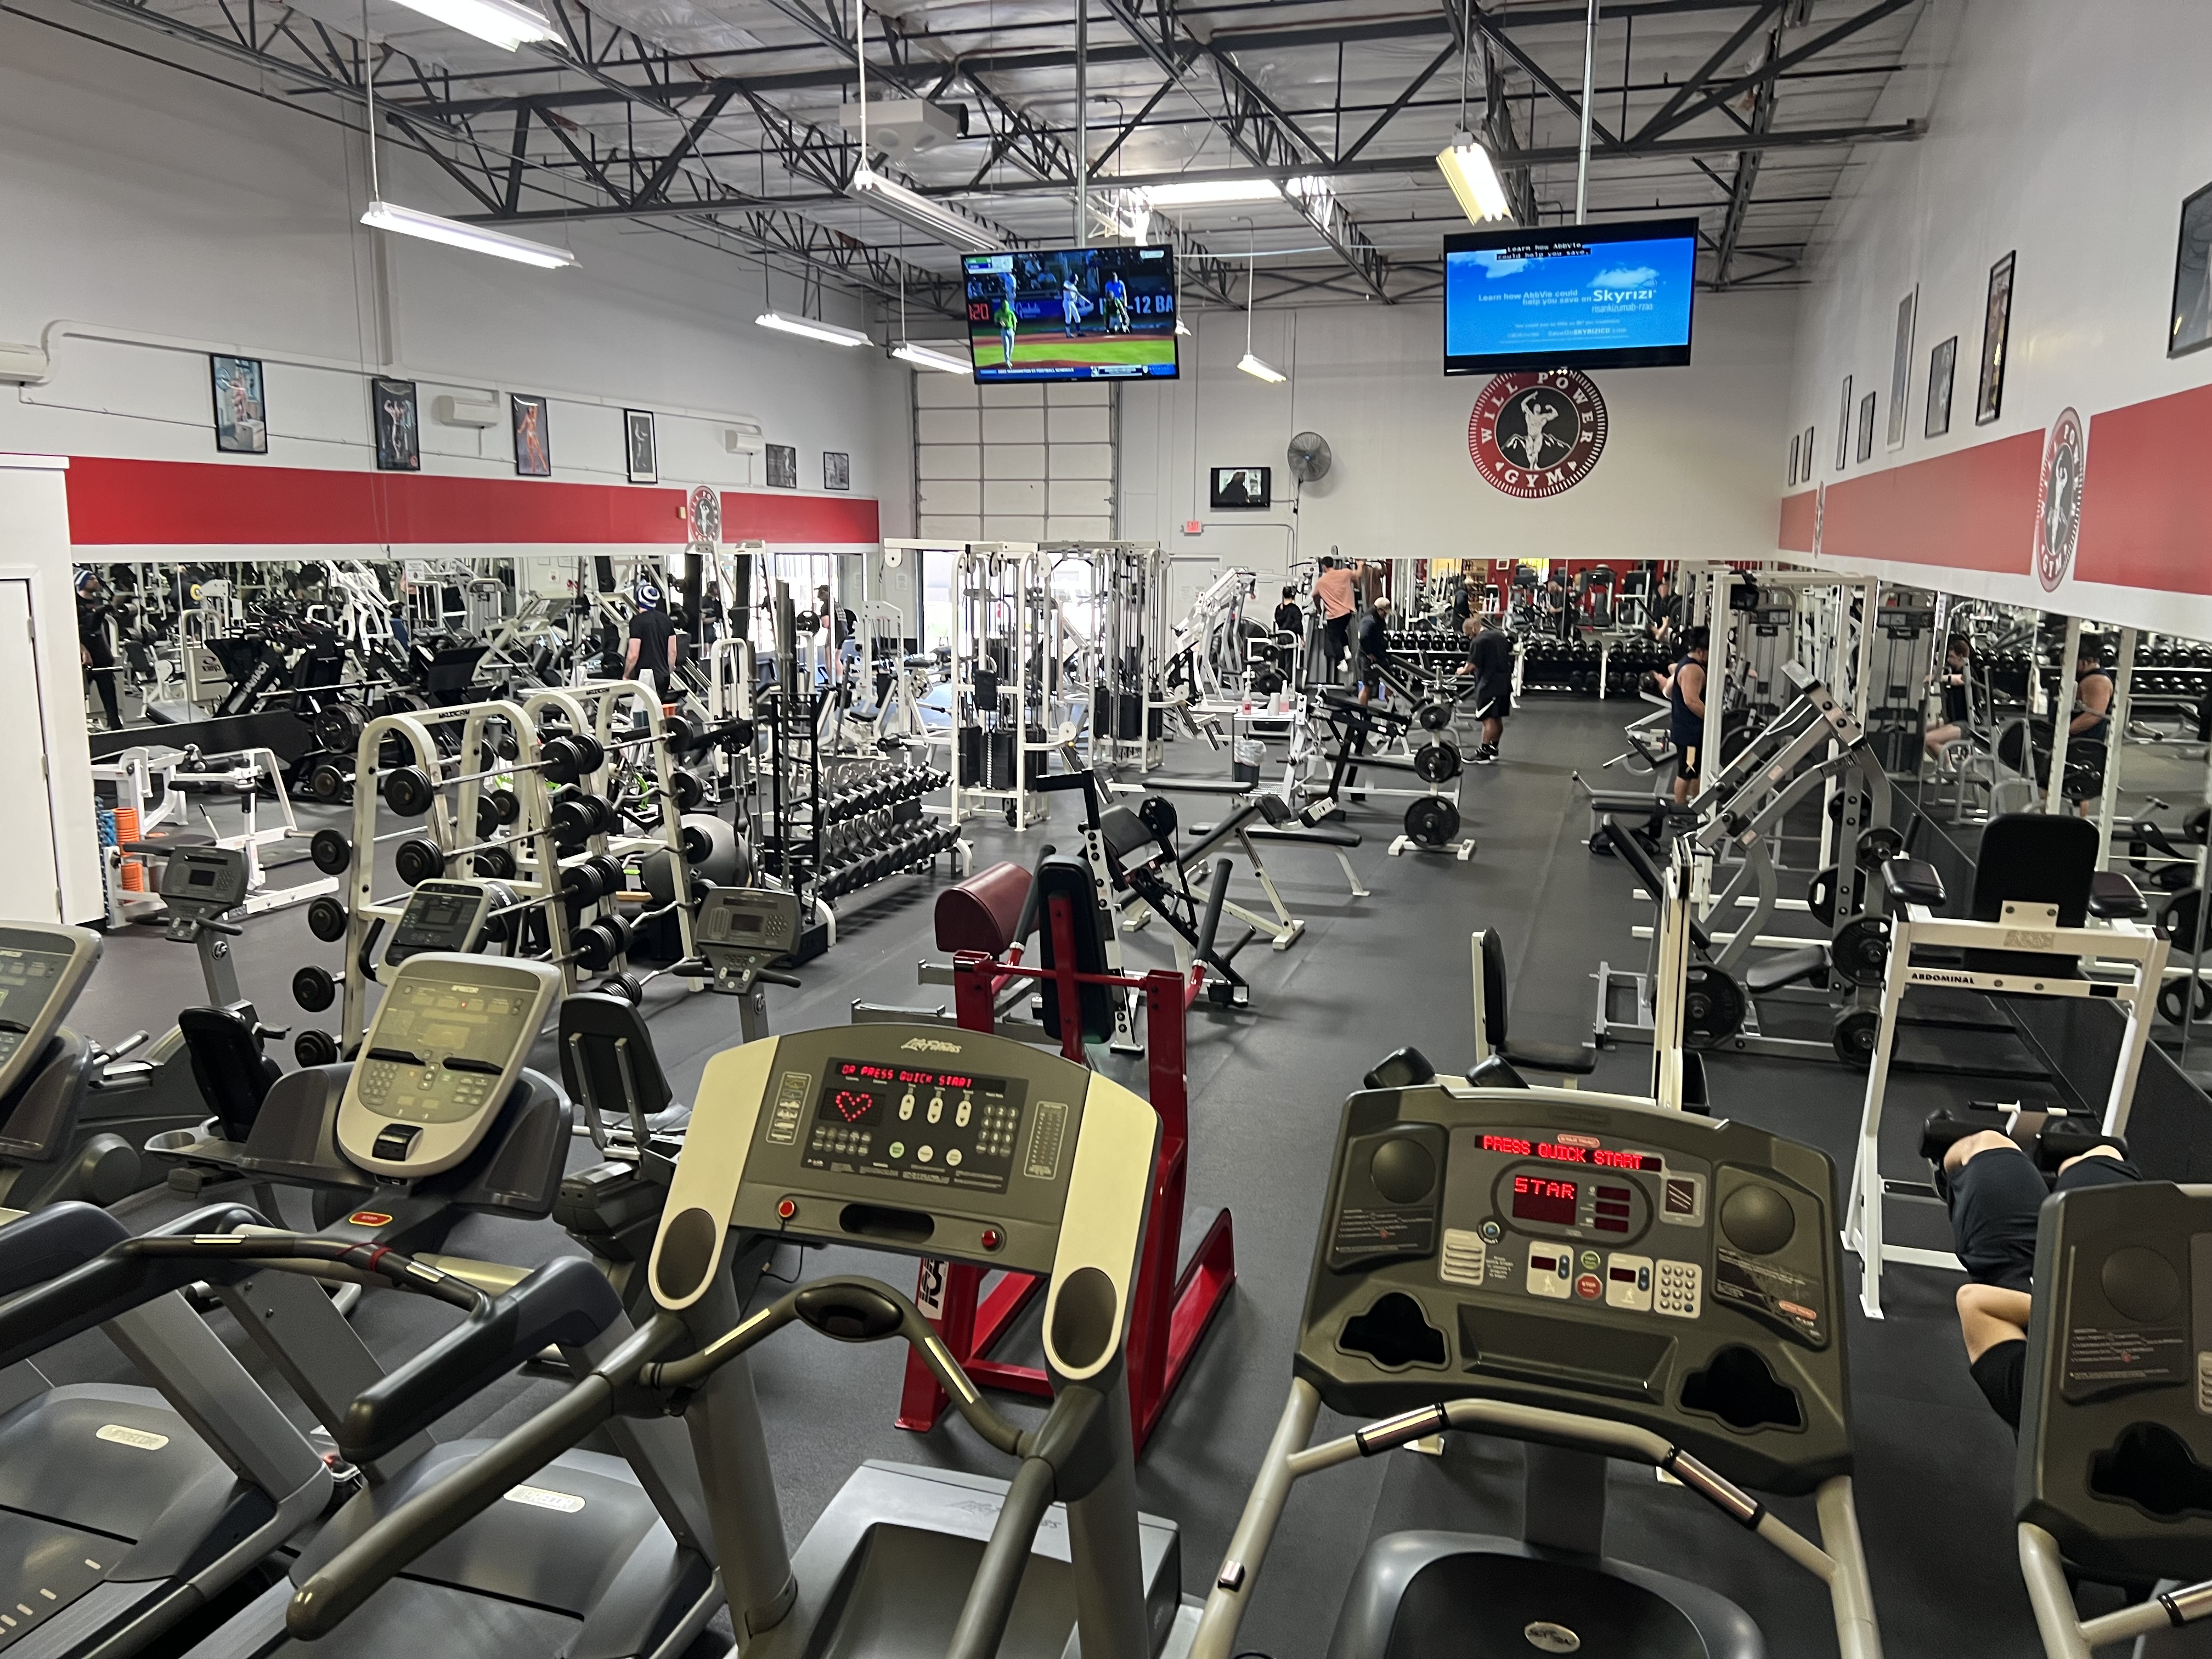 Overview of the Gym